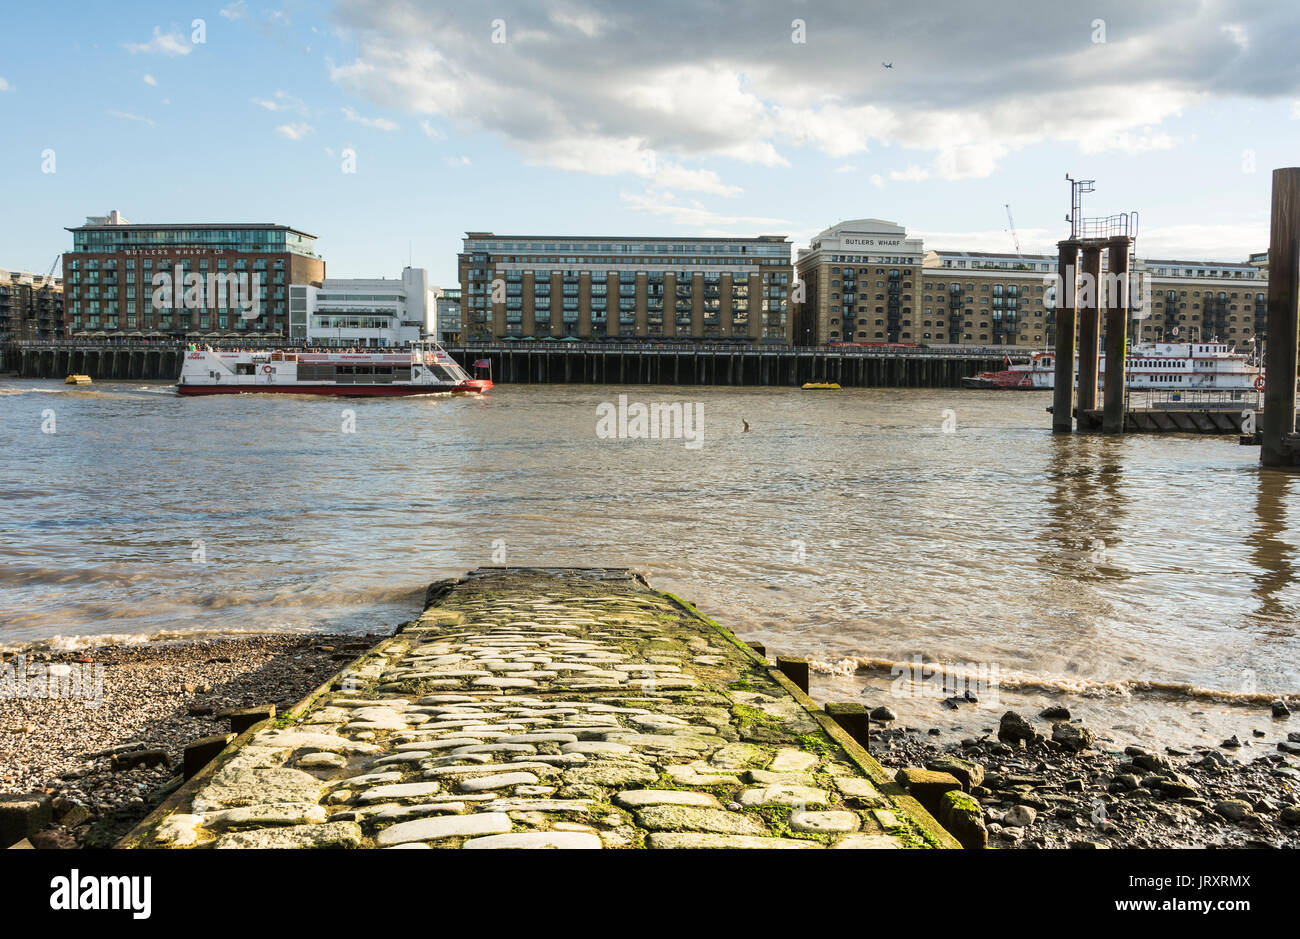 The ancient Alderman Stairs leading down to the River Thames in Wapping, London, England, U.K. Stock Photo